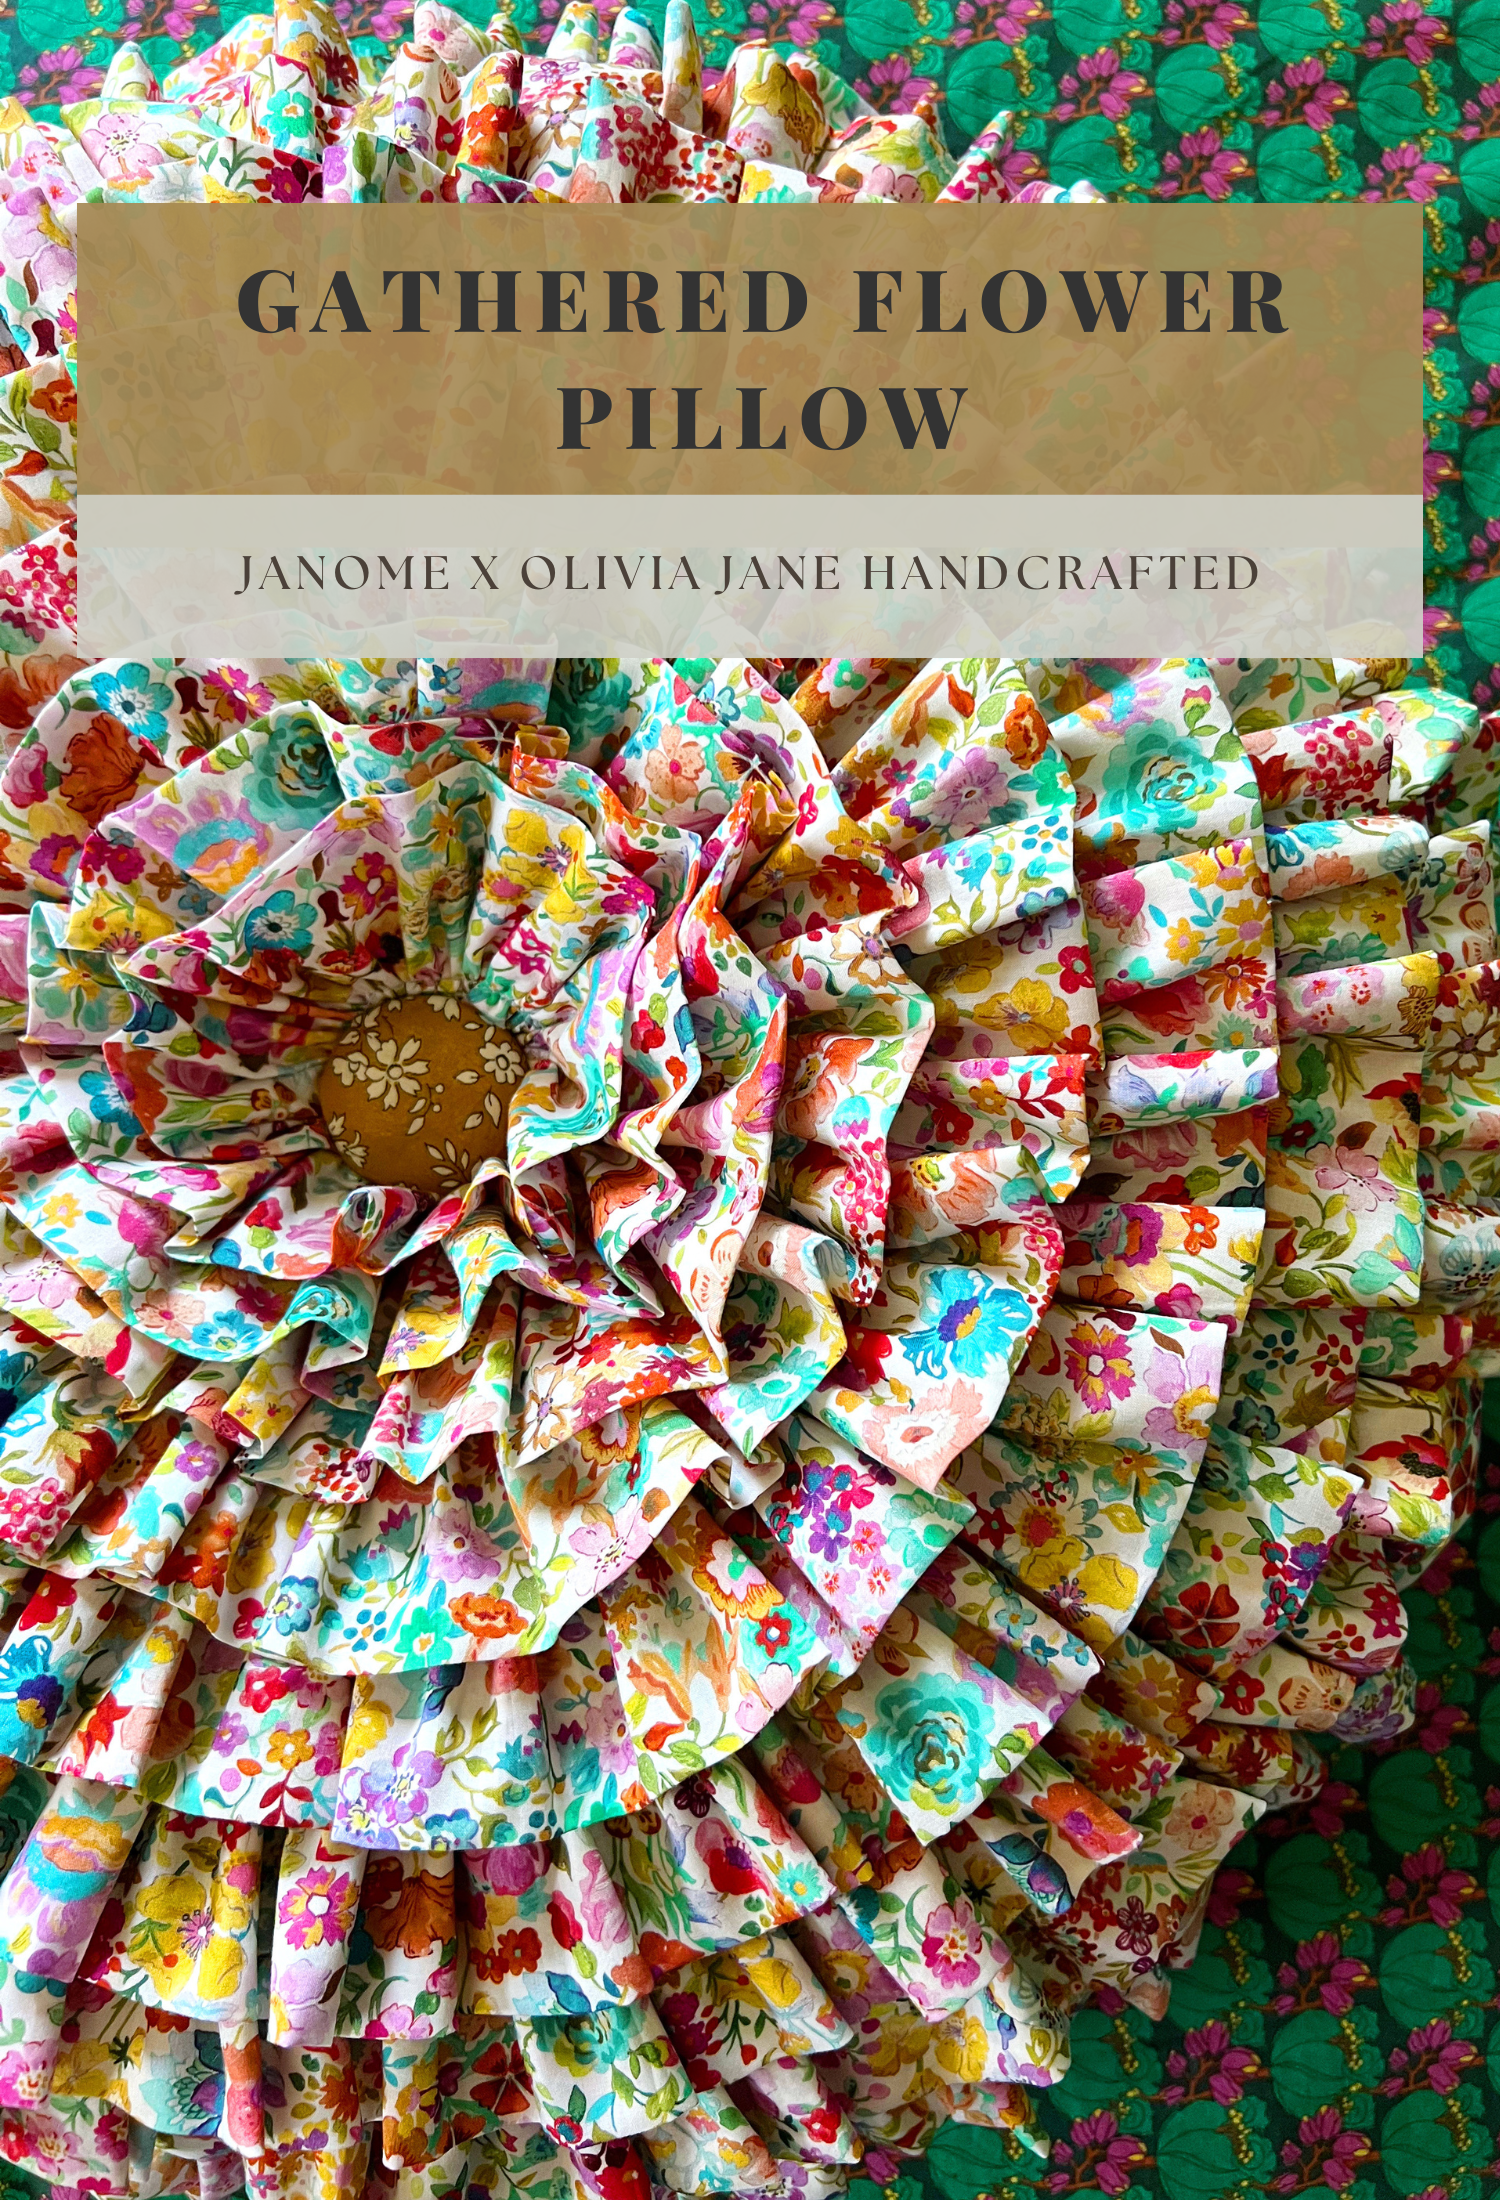 https://www.janome.com/siteassets/inspire/projects/home-decor/gathered-flower-pillow/gathered-flower-promo.png